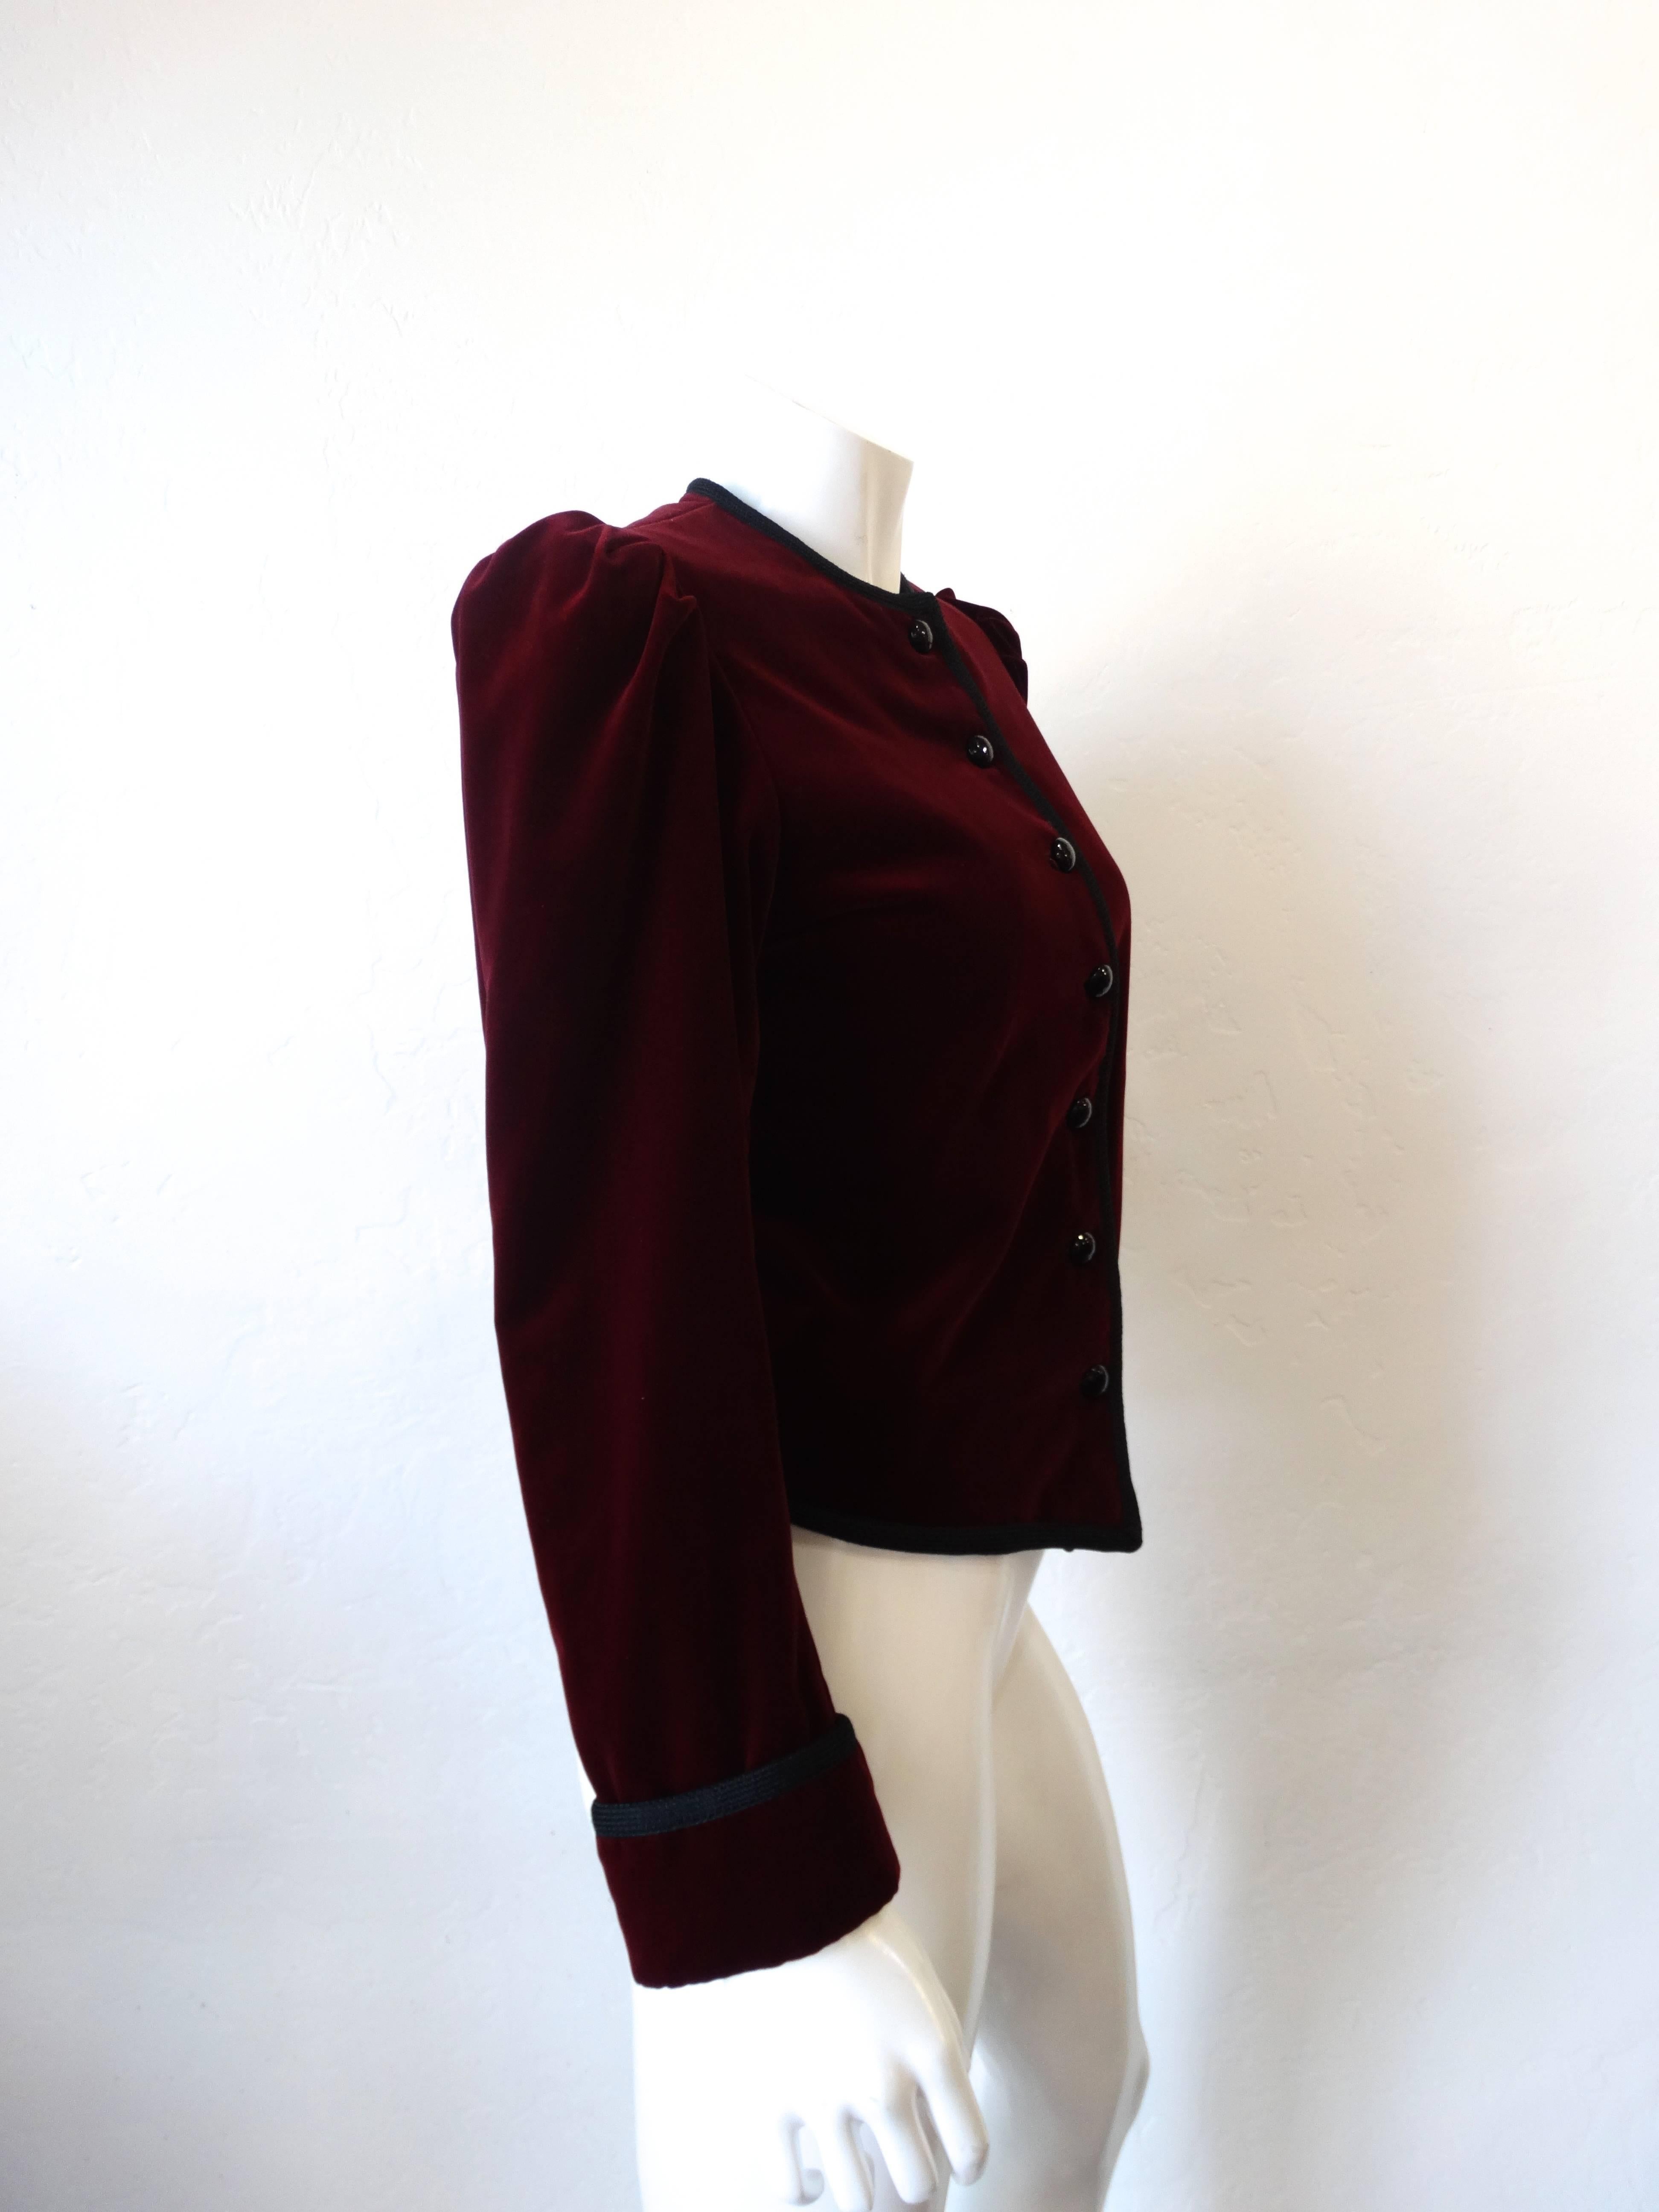 1970s Velvet coat from Saint Laurent Rive Gauche! Fitted through the bodice with dramatic puff sleeves and tapered arms. Made of thick burgundy velvet with black knit trim. Black buttons up the front of the jacket. Fully lined satin interior. Marked